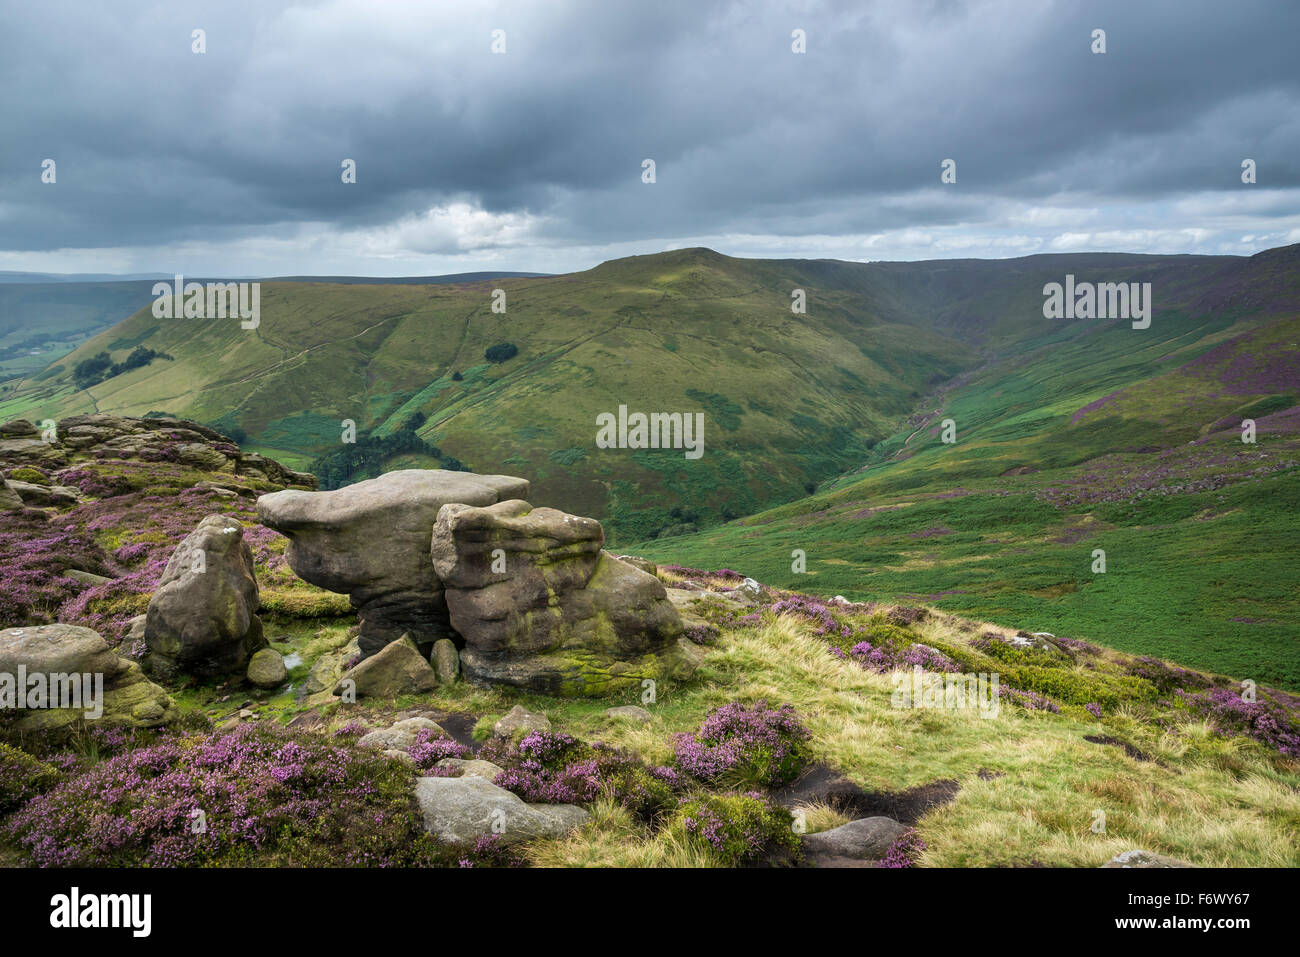 Changeable weather on the hills of the Peak District in Derbyshire. View from Ringing Roger near Edale. Rain falling on hills. Stock Photo